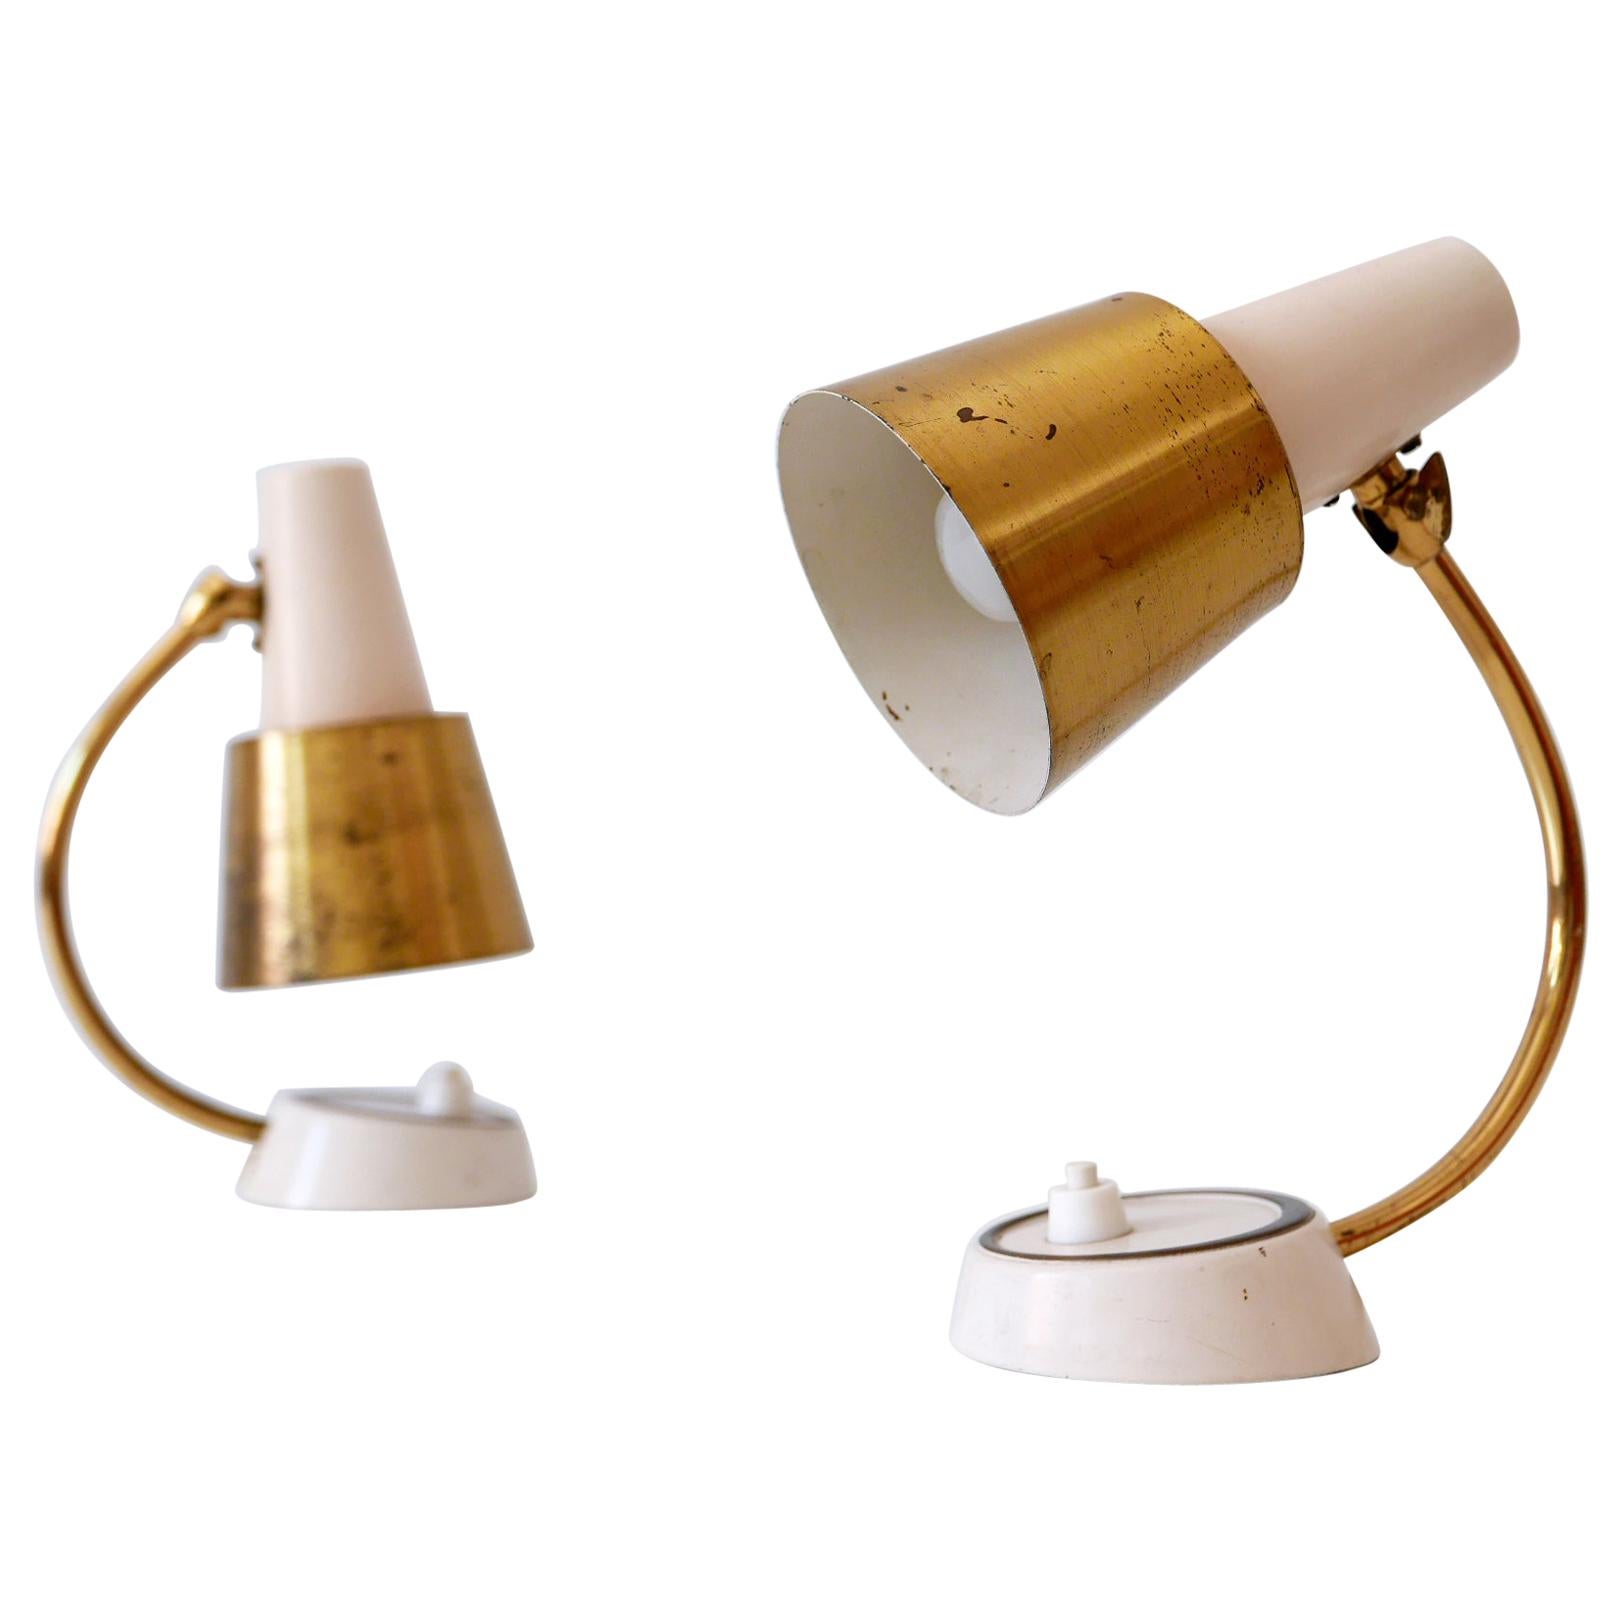 Set of Two Mid-Century Modern Bedside Table Lamps or Wall Lights, 1950s, Germany